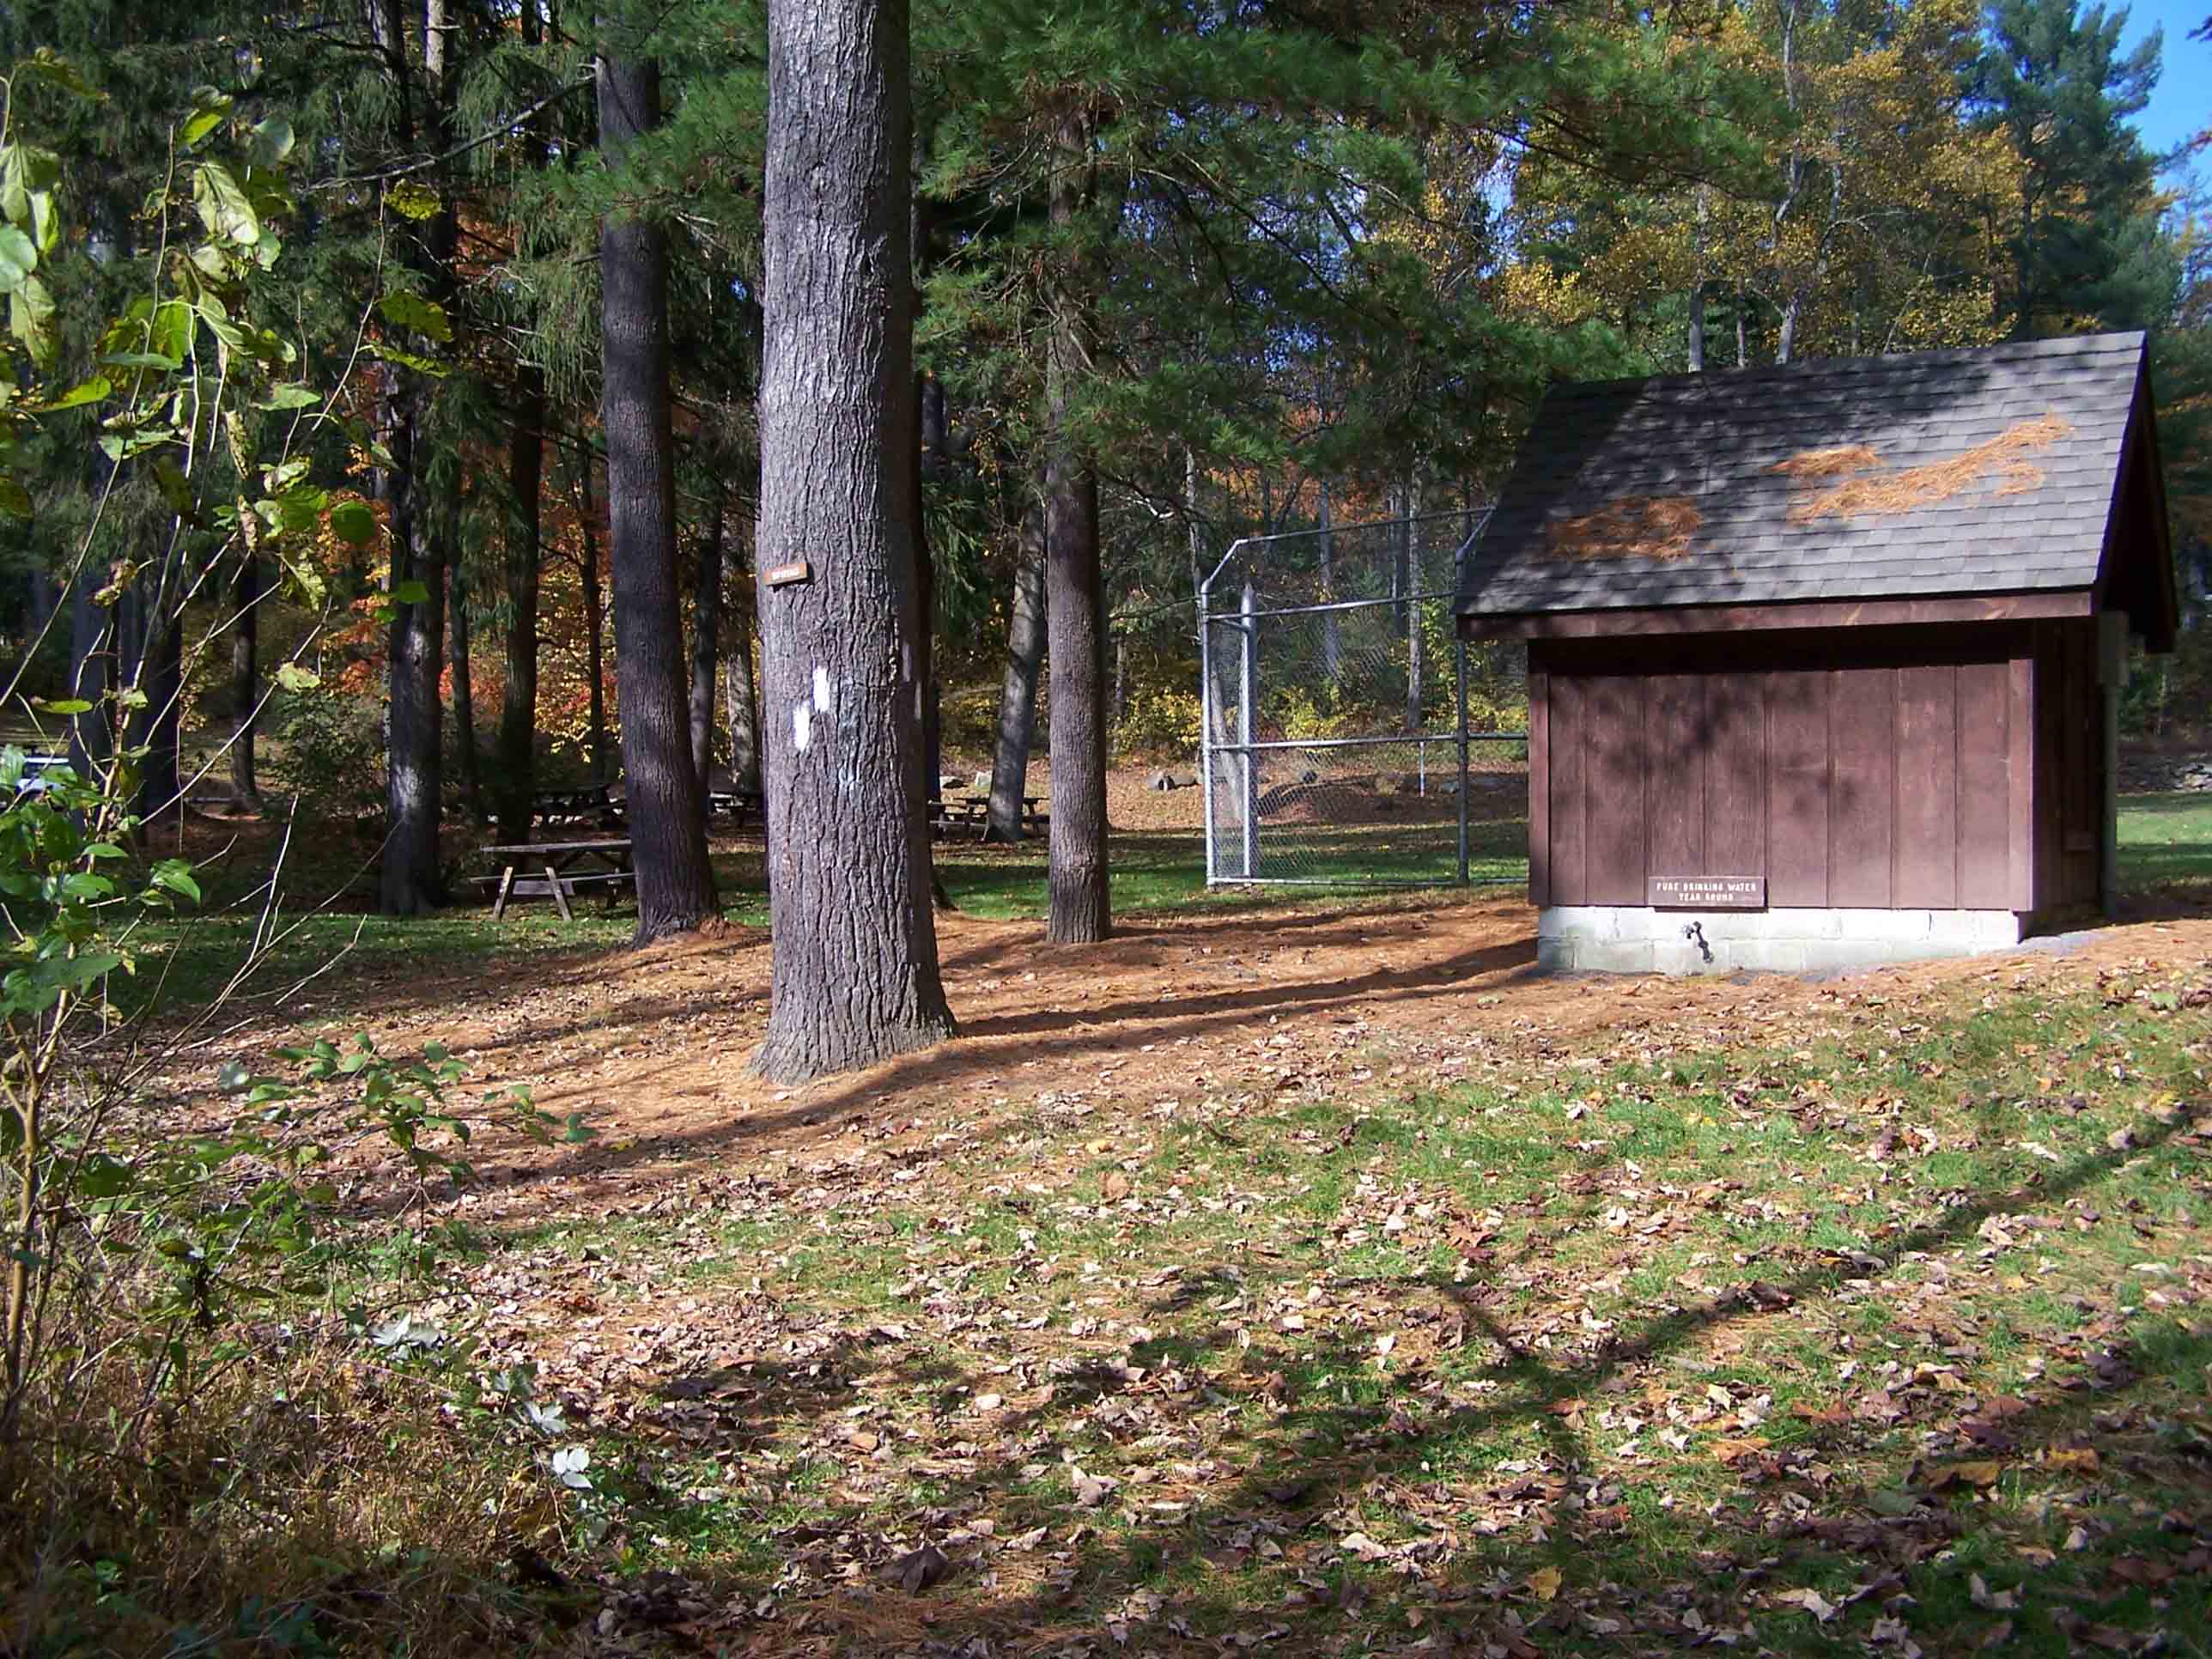 mm 10.7 Old Forge Picnic Grounds. Courtesy at@rohland.org